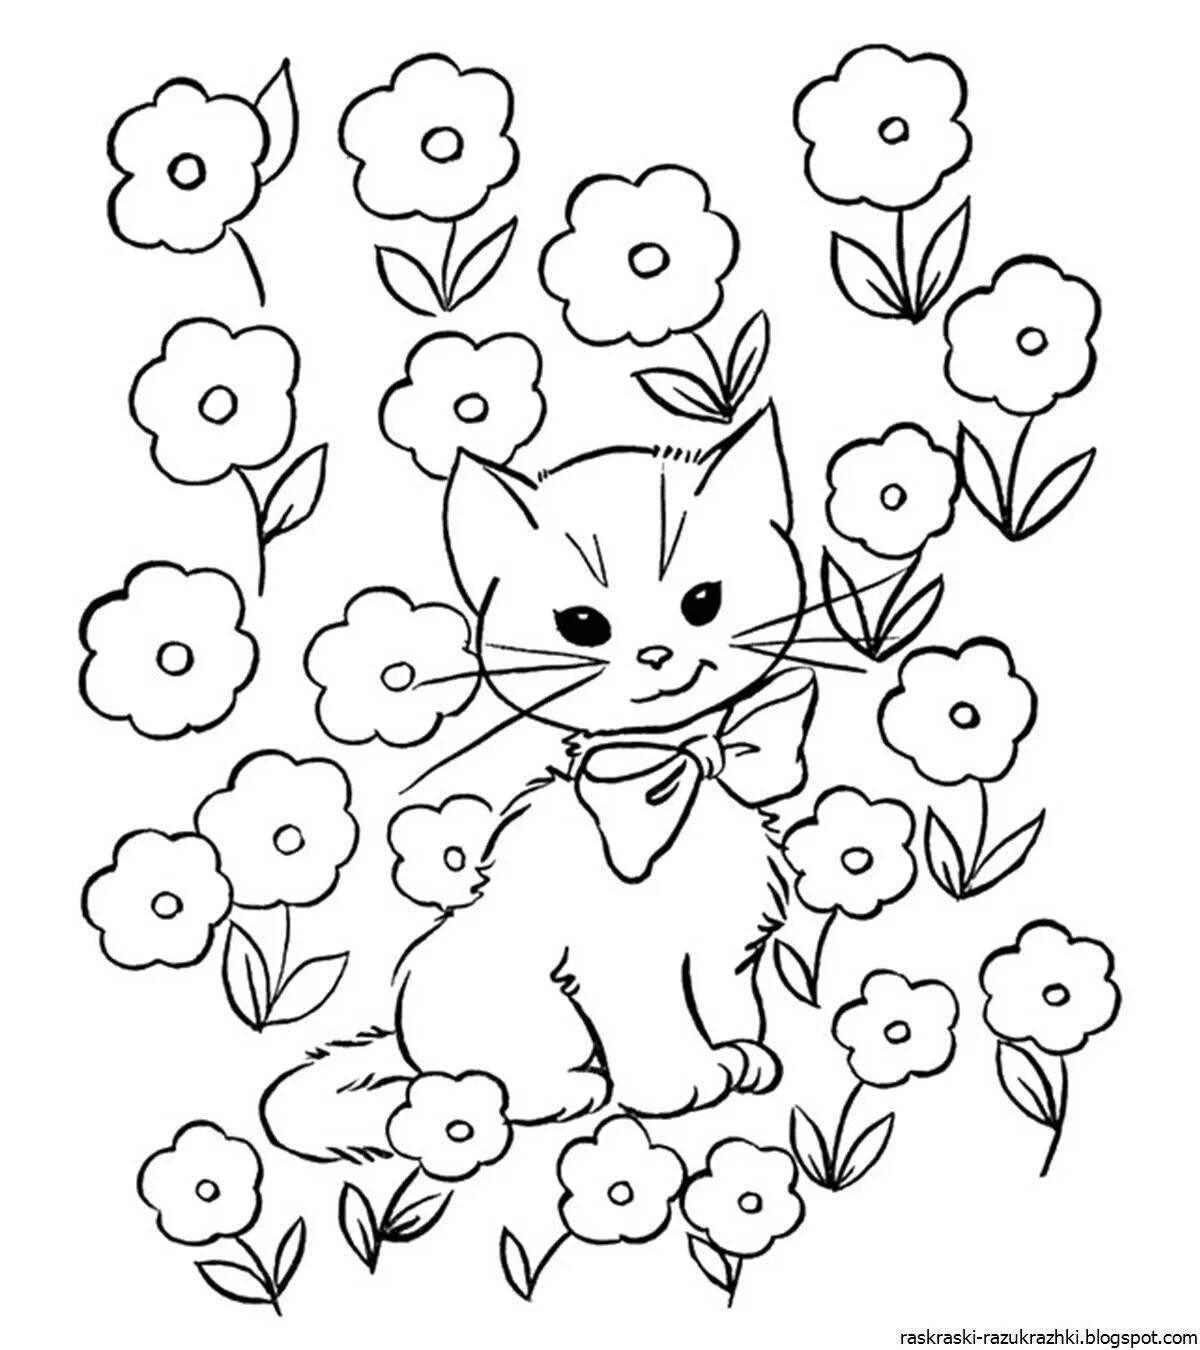 Charming coloring book for girls 7 years old with cats